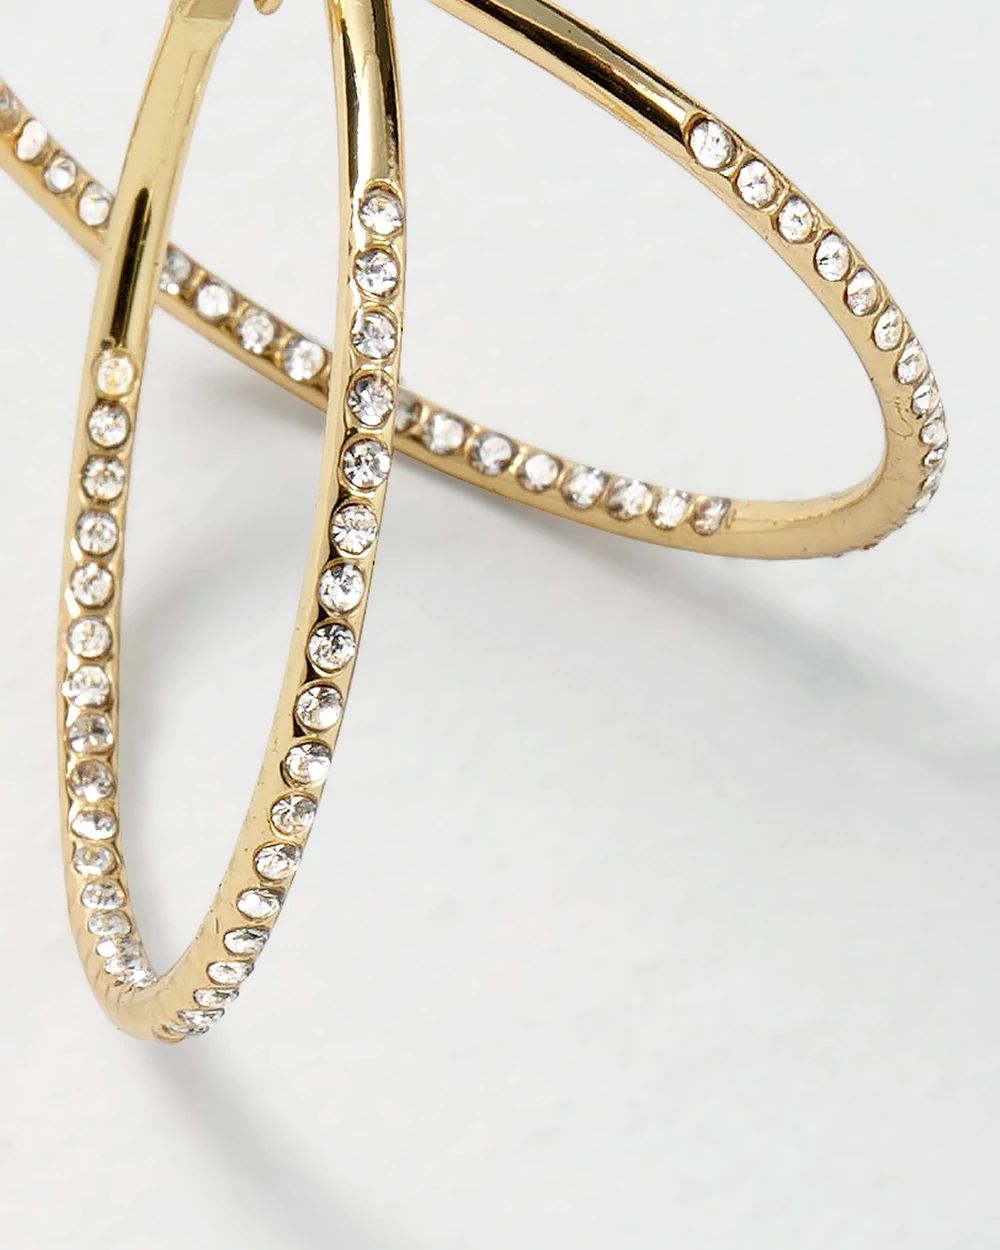 Crystal Double Pave Hoop Earrings click to view larger image.